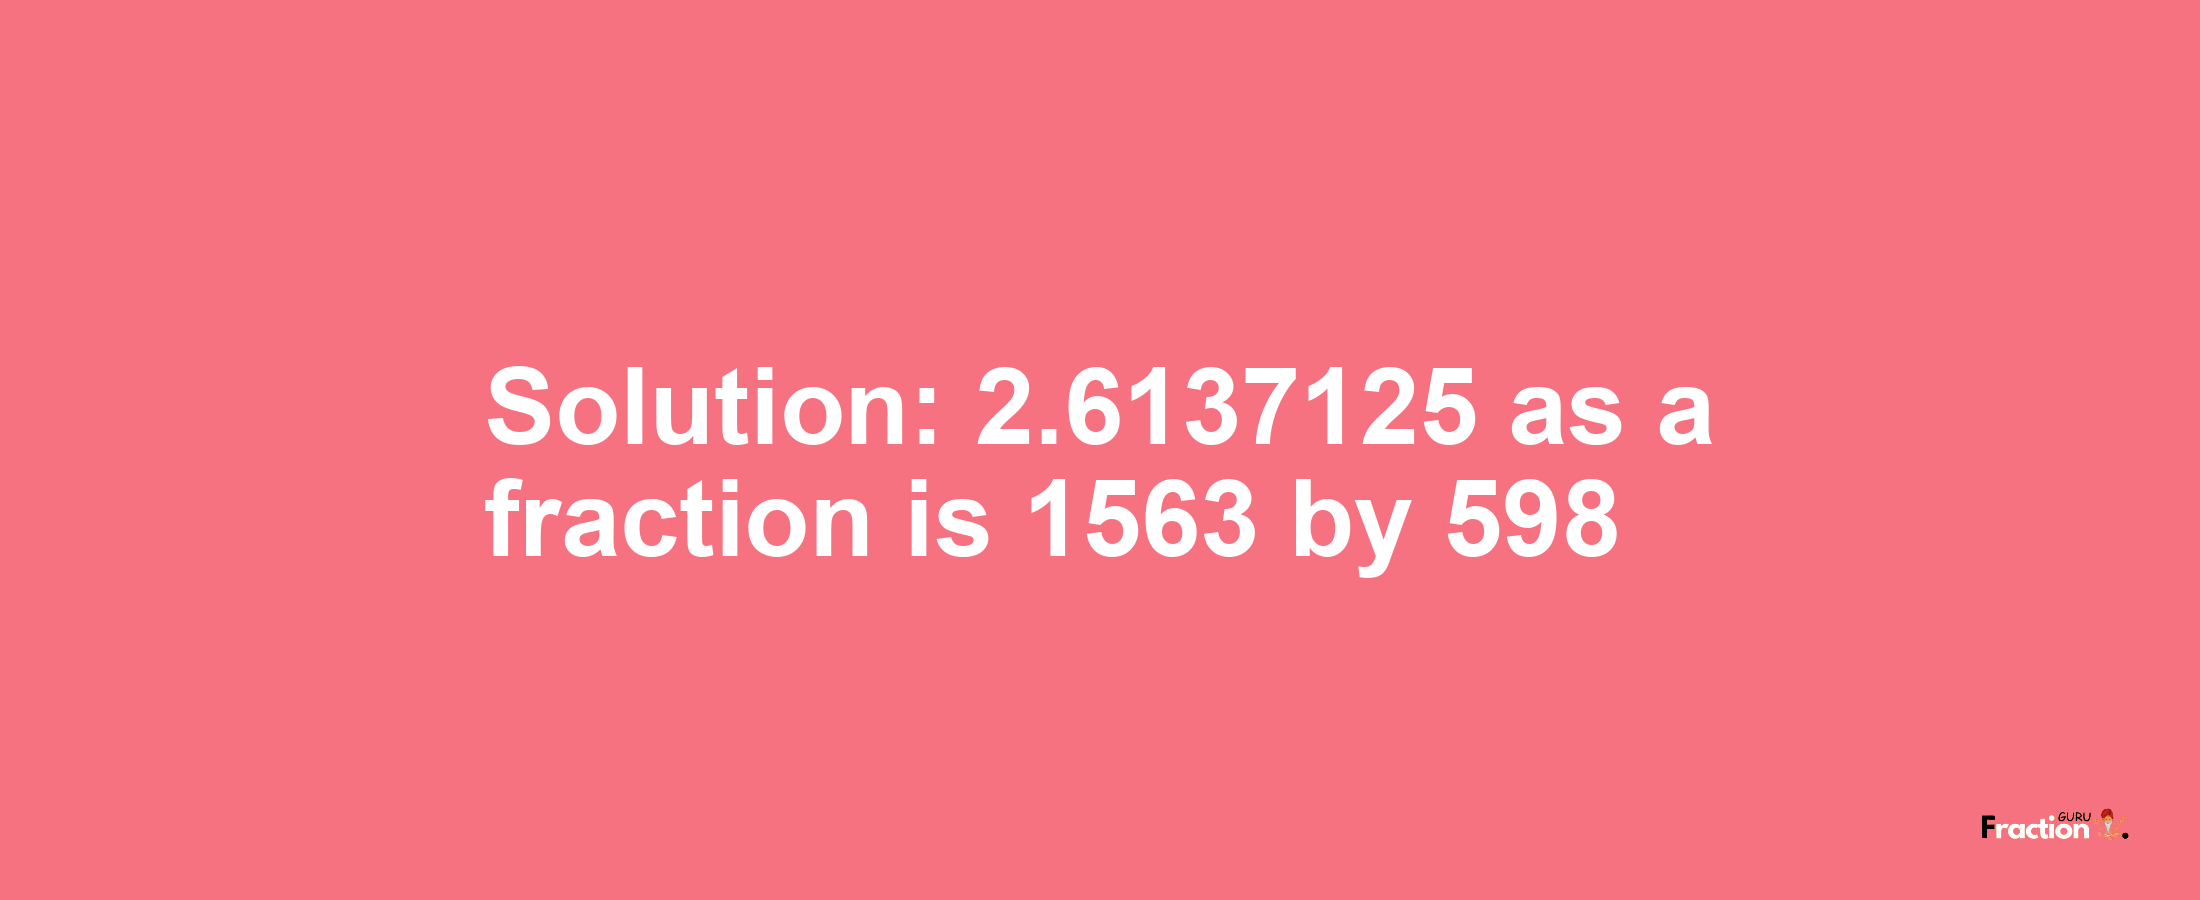 Solution:2.6137125 as a fraction is 1563/598